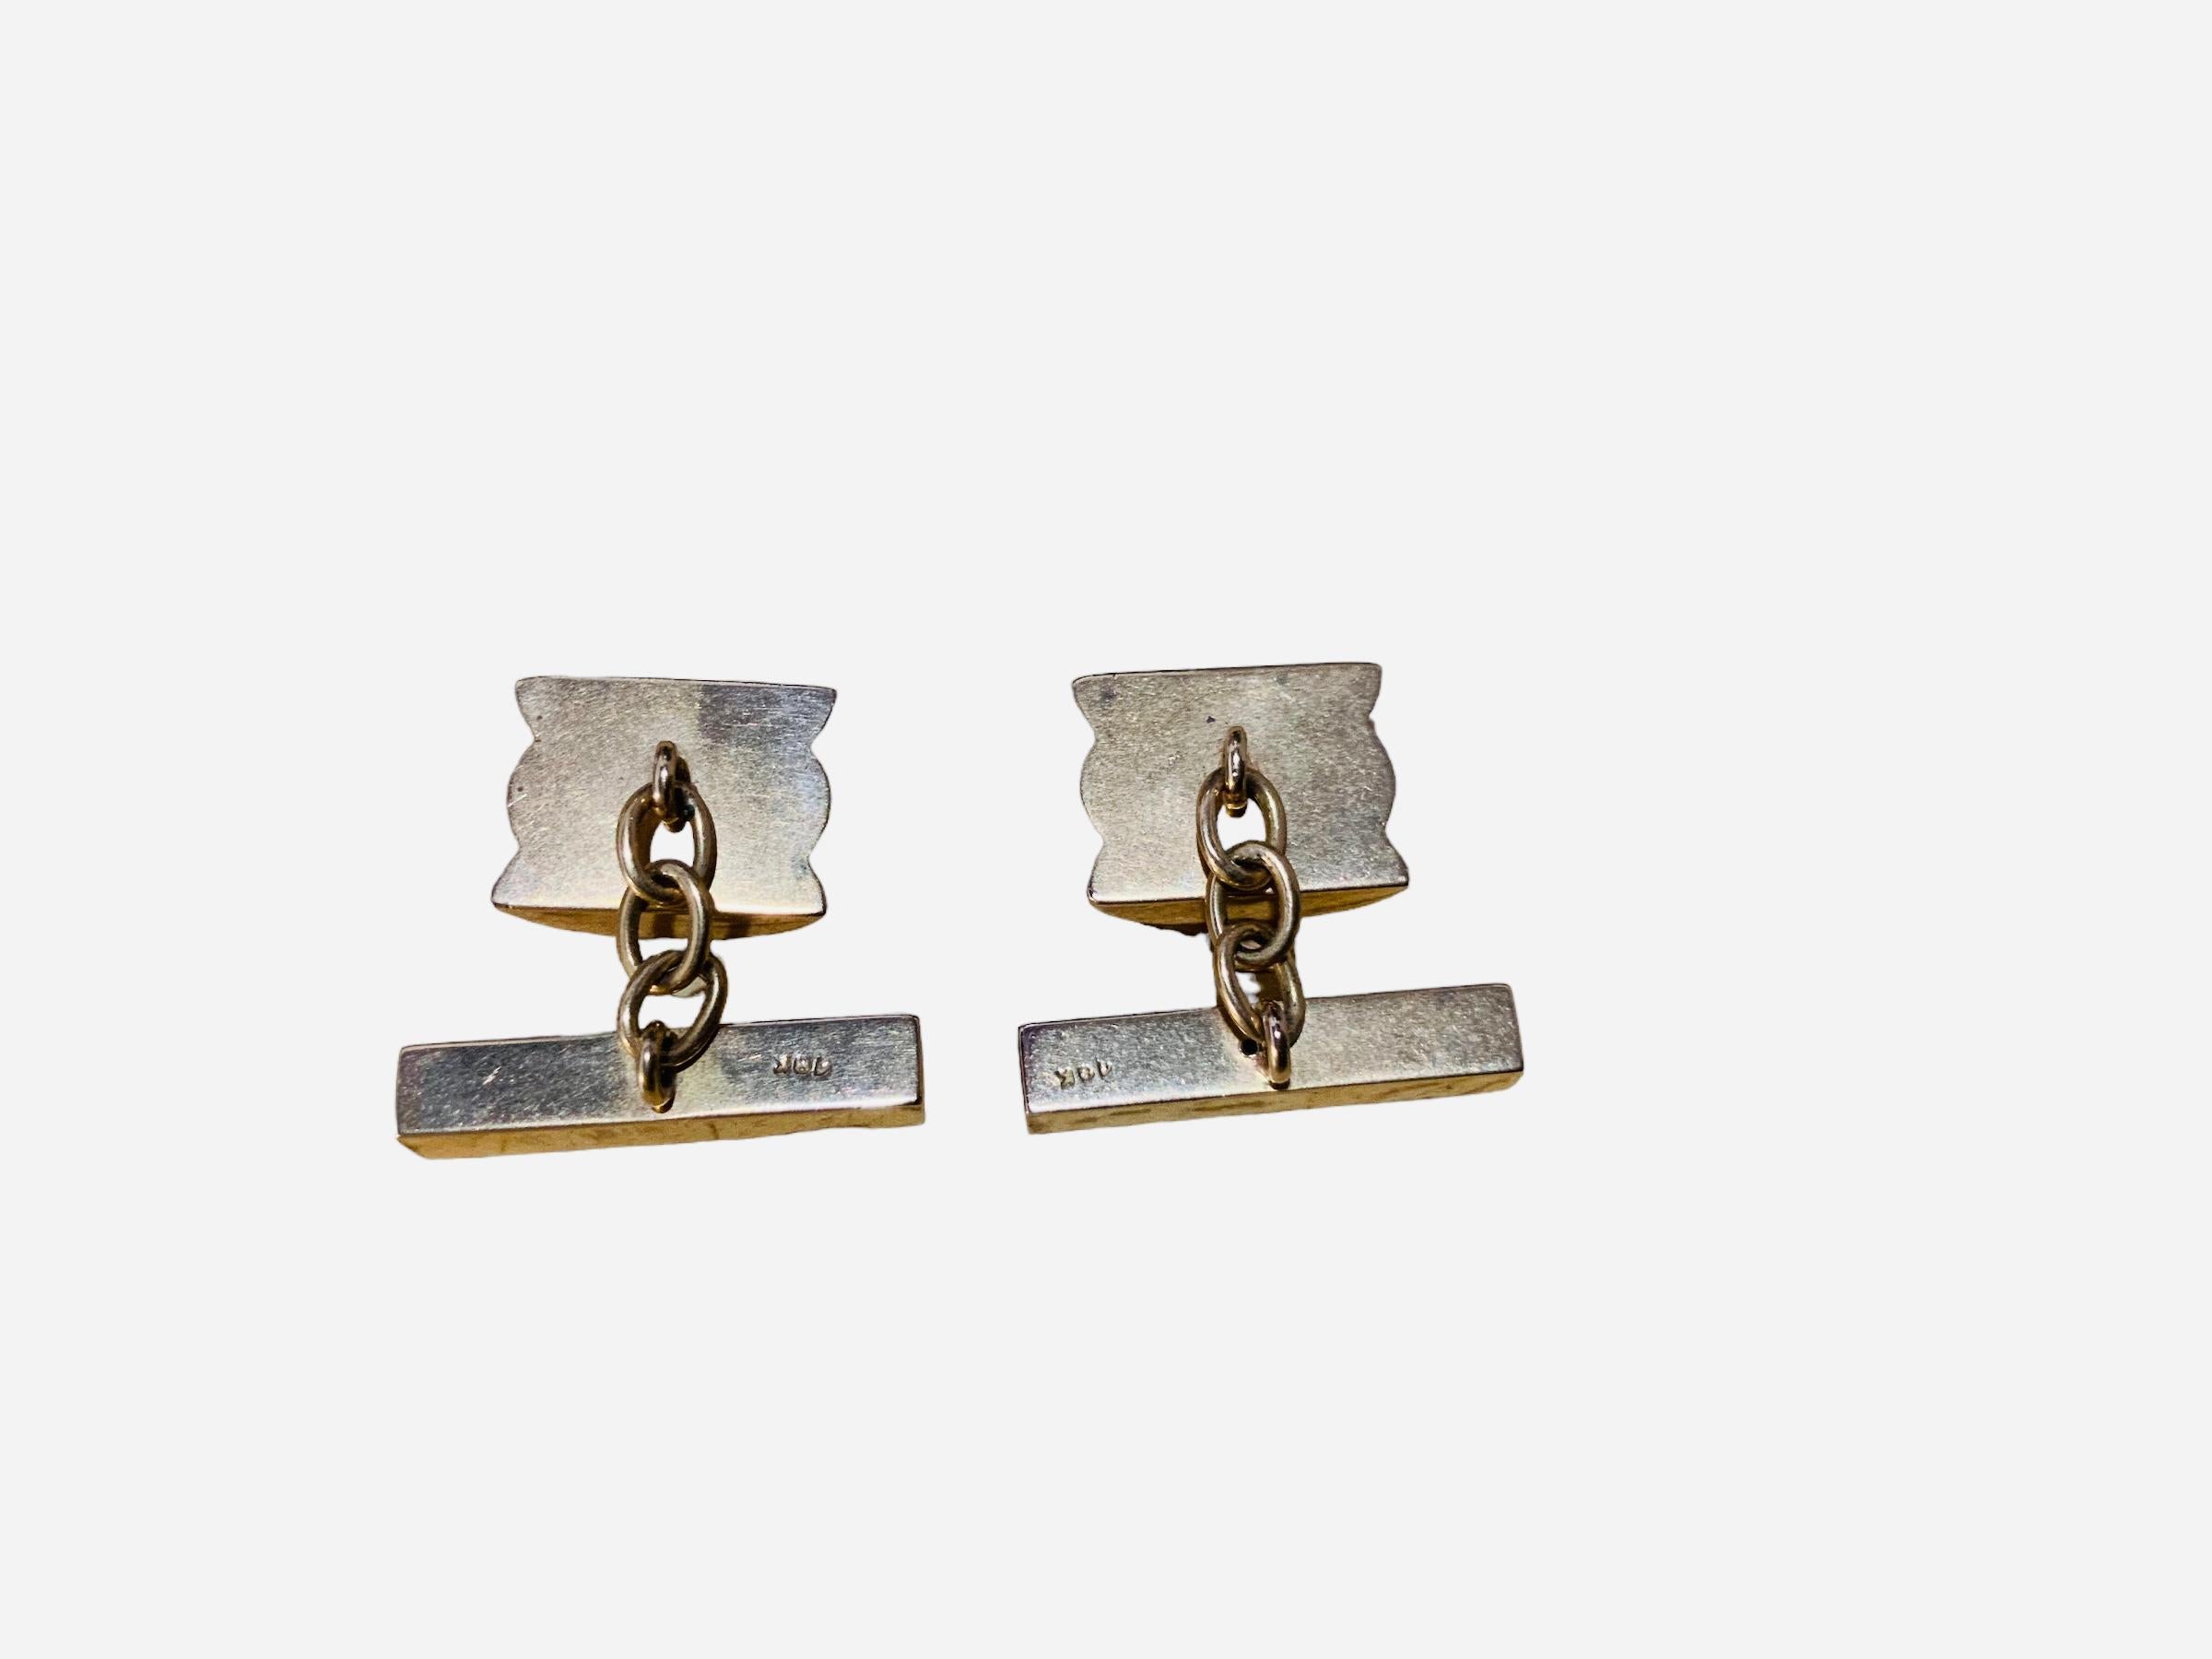 This is a pair of 18K yellow gold barrel shaped chain link cufflinks. They are hallmarked 18K in the gold bar joined by the chain to the barrel. The measurements of the barrel is approximately 0.3 x 0.5 inches.